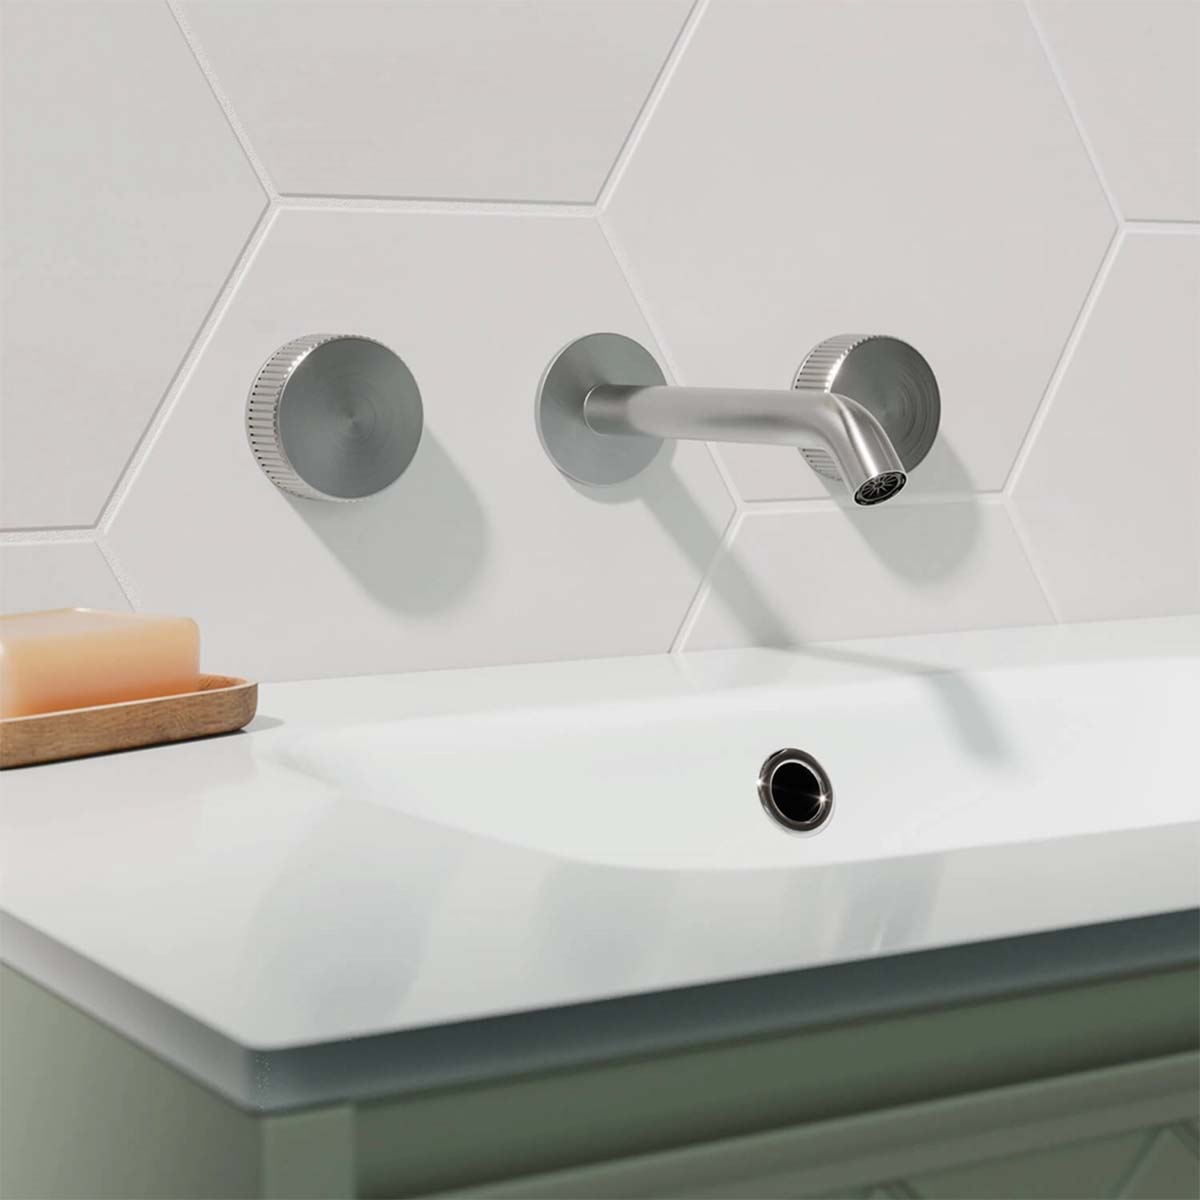 Crosswater 3ONE6 3 Hole Wall Mounted Basin Mixer Tap - Stainless Steel Lifestyle